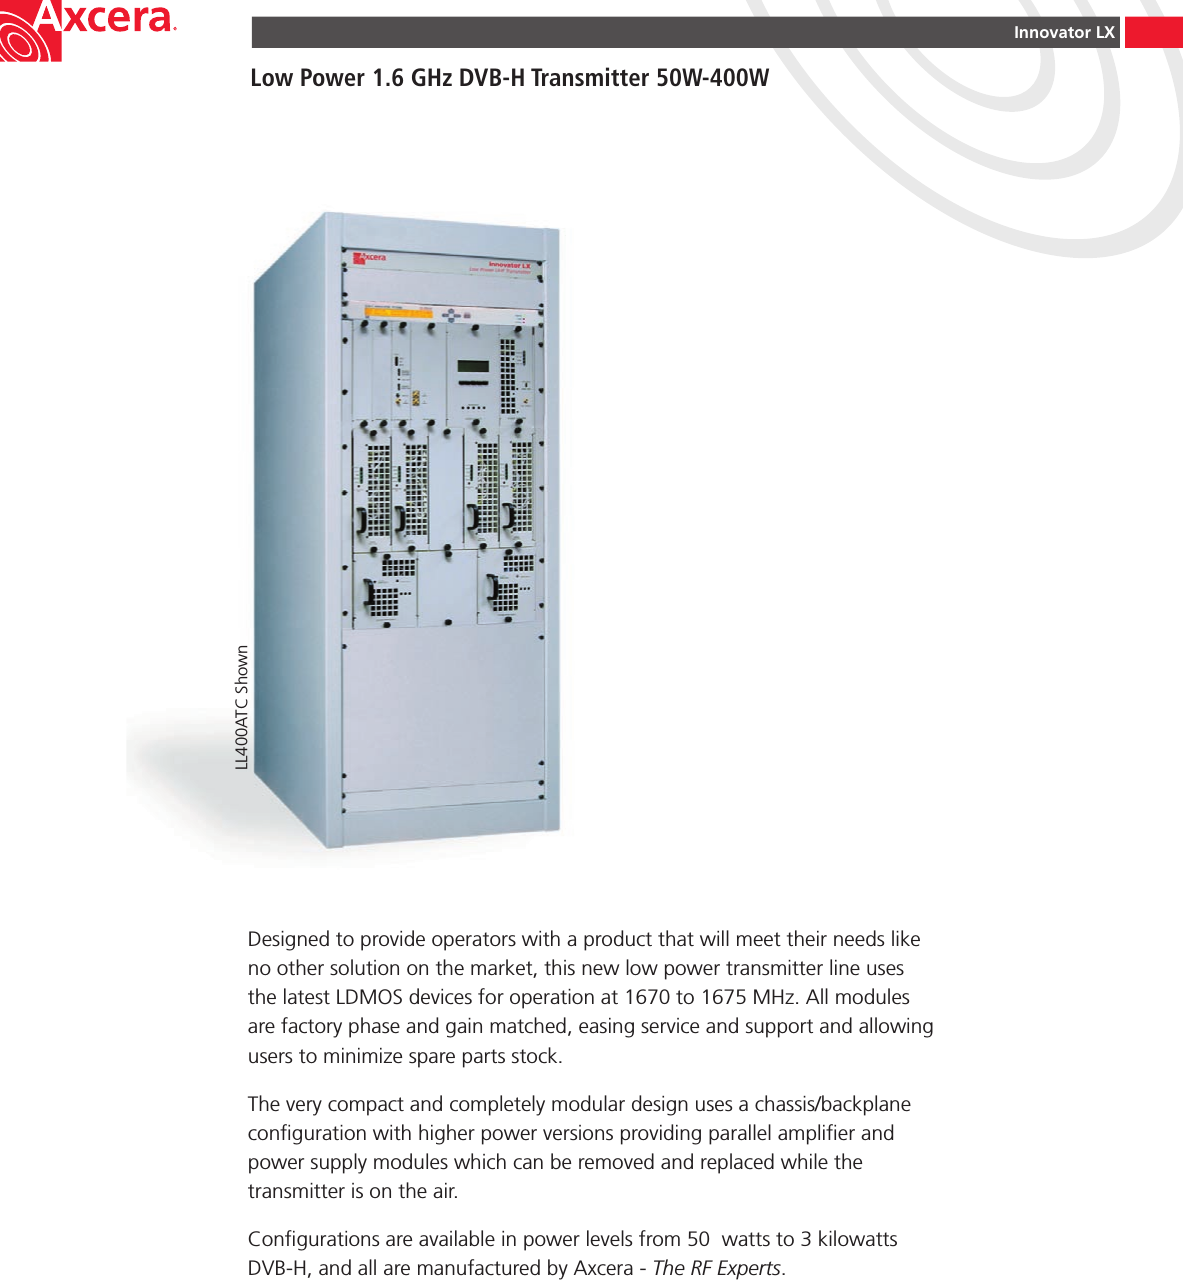 Innovator LXLow Power 1.6 GHz DVB-H Transmitter 50W-400WDesigned to provide operators with a product that will meet their needs like no other solution on the market, this new low power transmitter line uses the latest LDMOS devices for operation at 1670 to 1675 MHz. All modules are factory phase and gain matched, easing service and support and allowing users to minimize spare parts stock.The very compact and completely modular design uses a chassis/backplane conguration with higher power versions providing parallel amplier and power supply modules which can be removed and replaced while the transmitter is on the air.Congurations are available in power levels from 50  watts to 3 kilowatts DVB-H, and all are manufactured by Axcera - The RF Experts.LL400ATC Shown